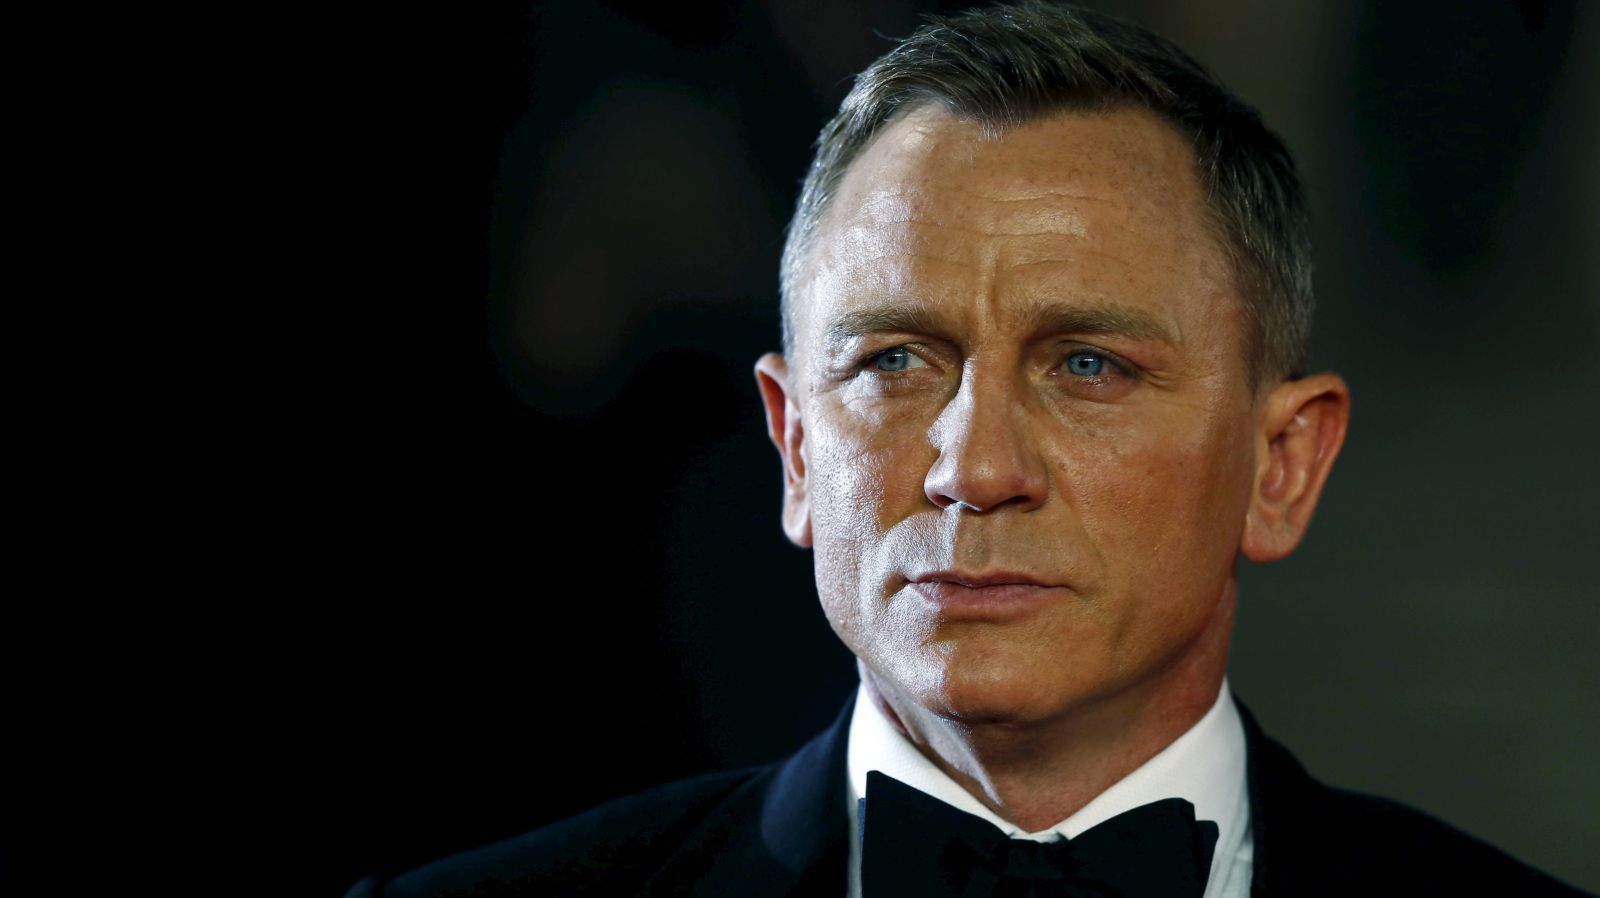 007 producers haven’t started looking for the new James Bond yet